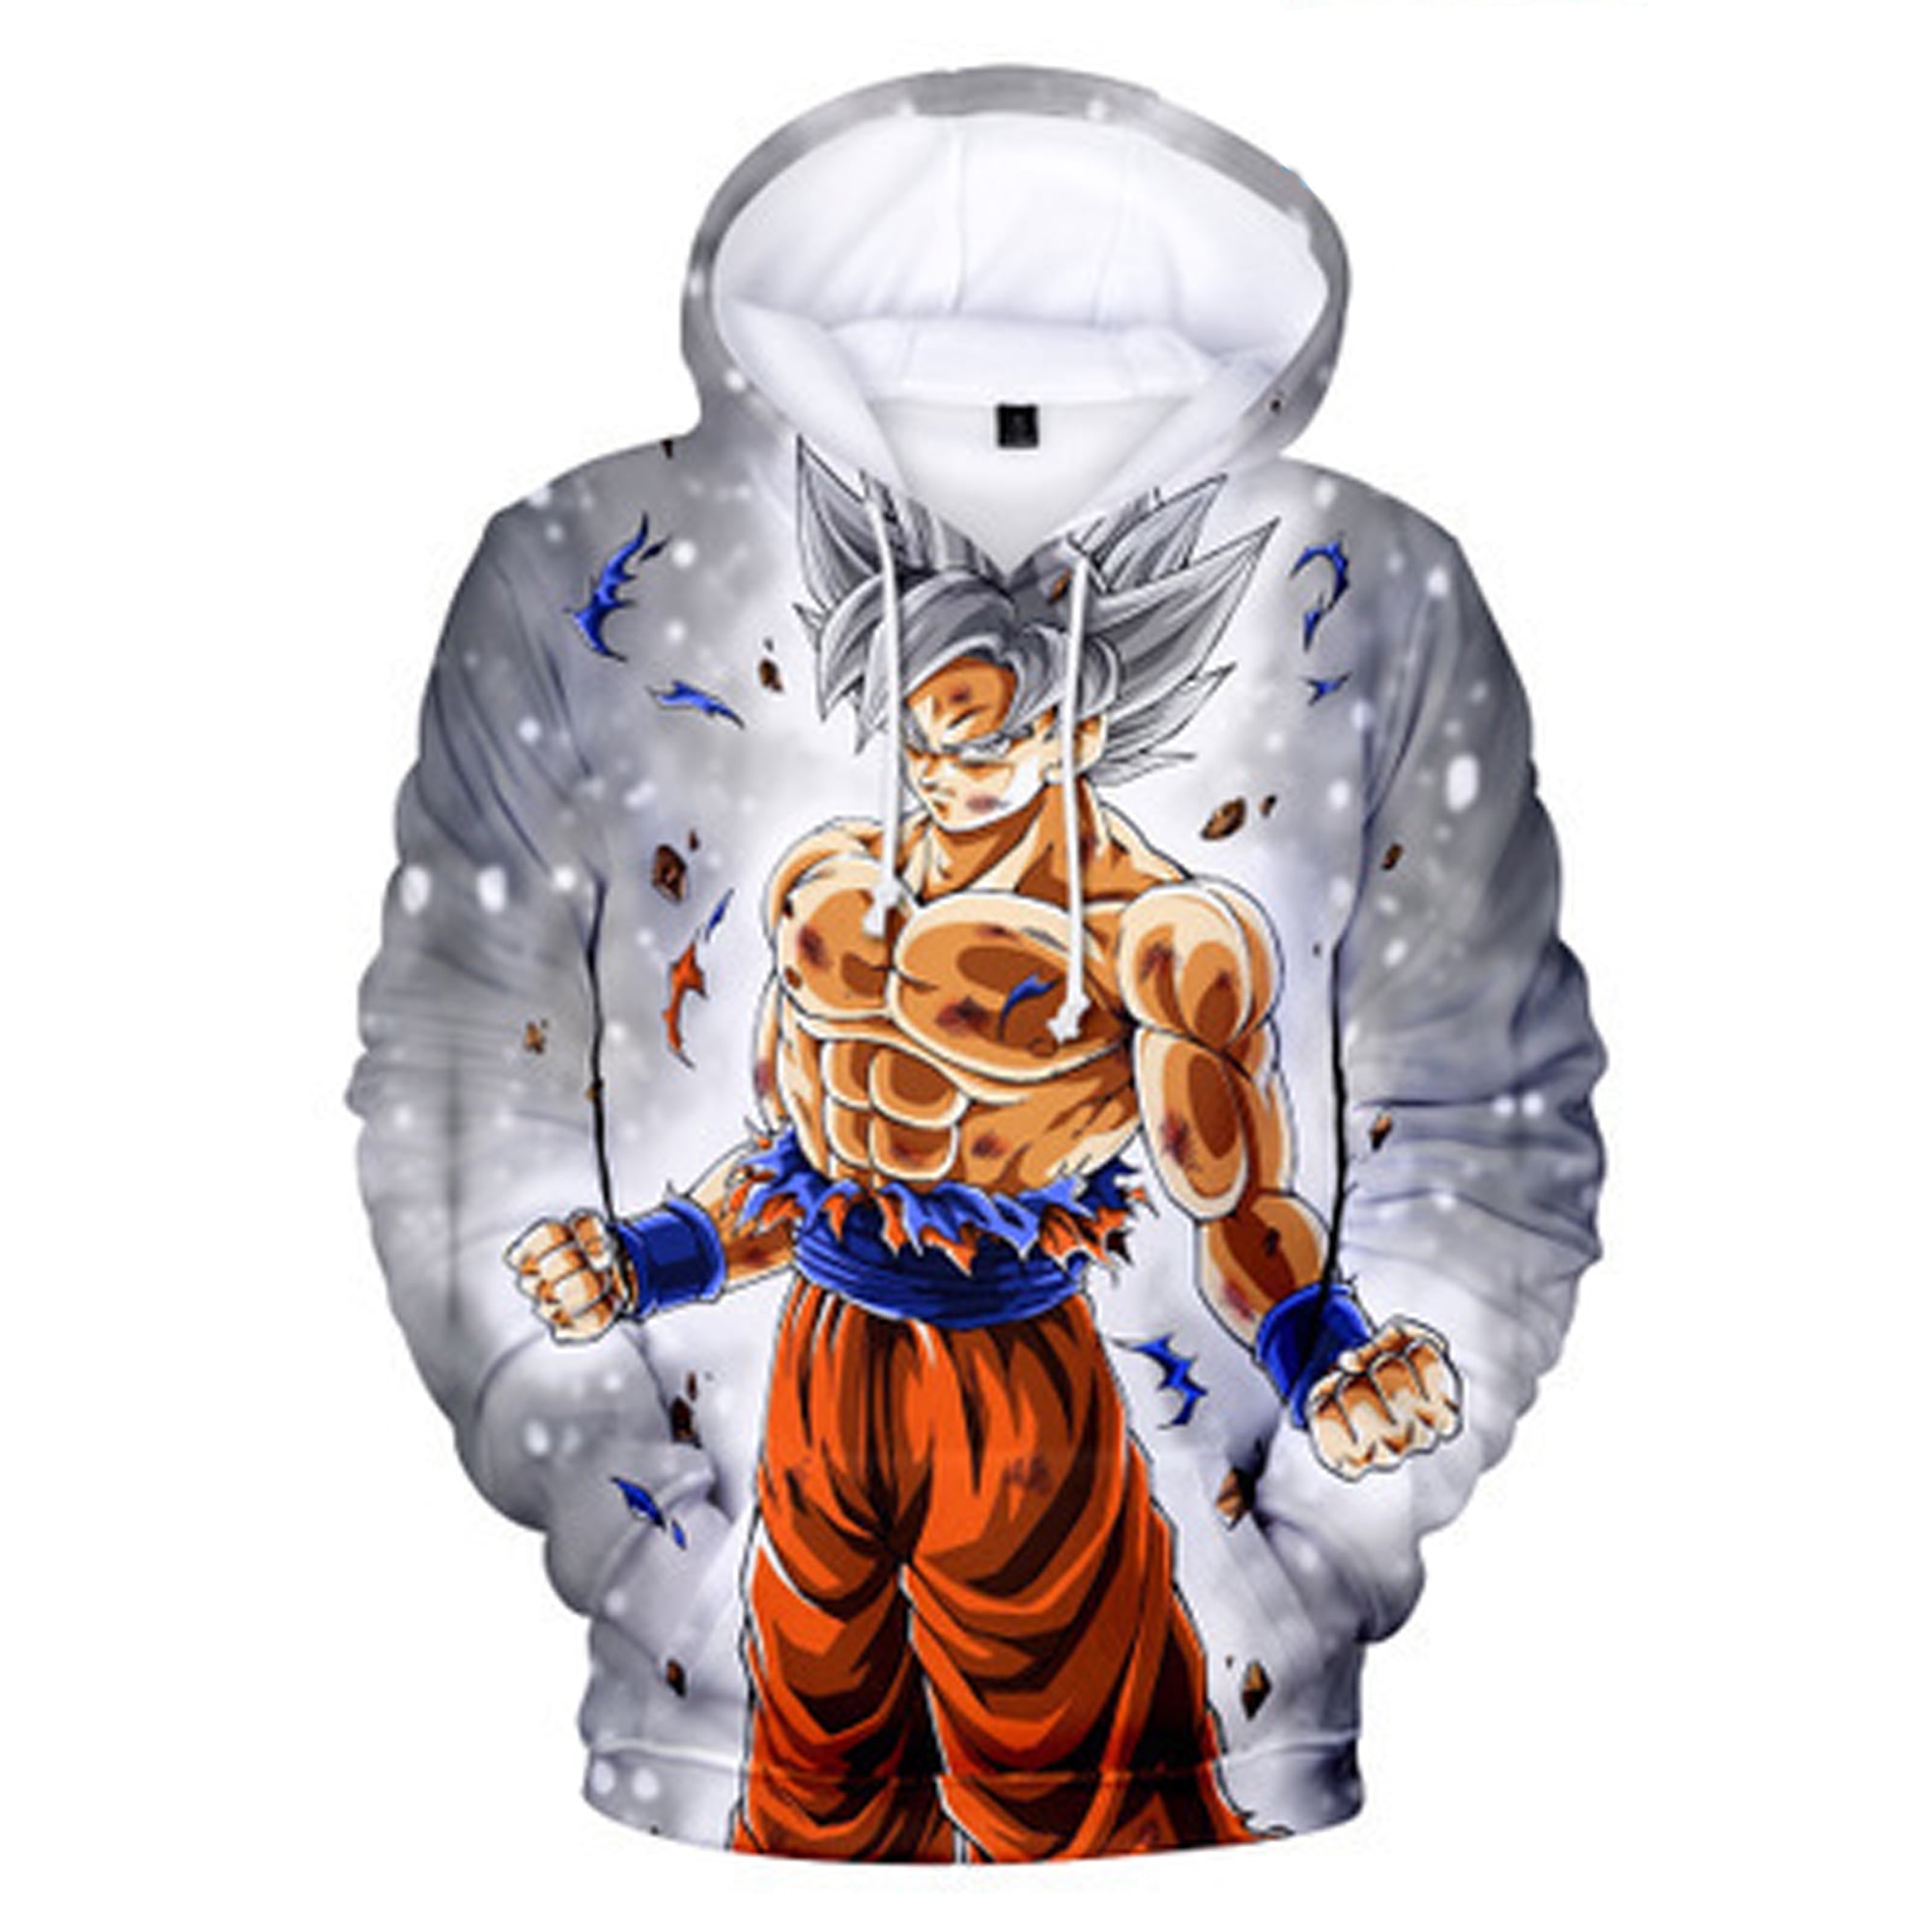 Wholesale Custom Men's Clothing You Own Design Woven Tapestry Hoodie Arm  Patchwork Sweatshirt Anime Hoodies Men From m.alibaba.com